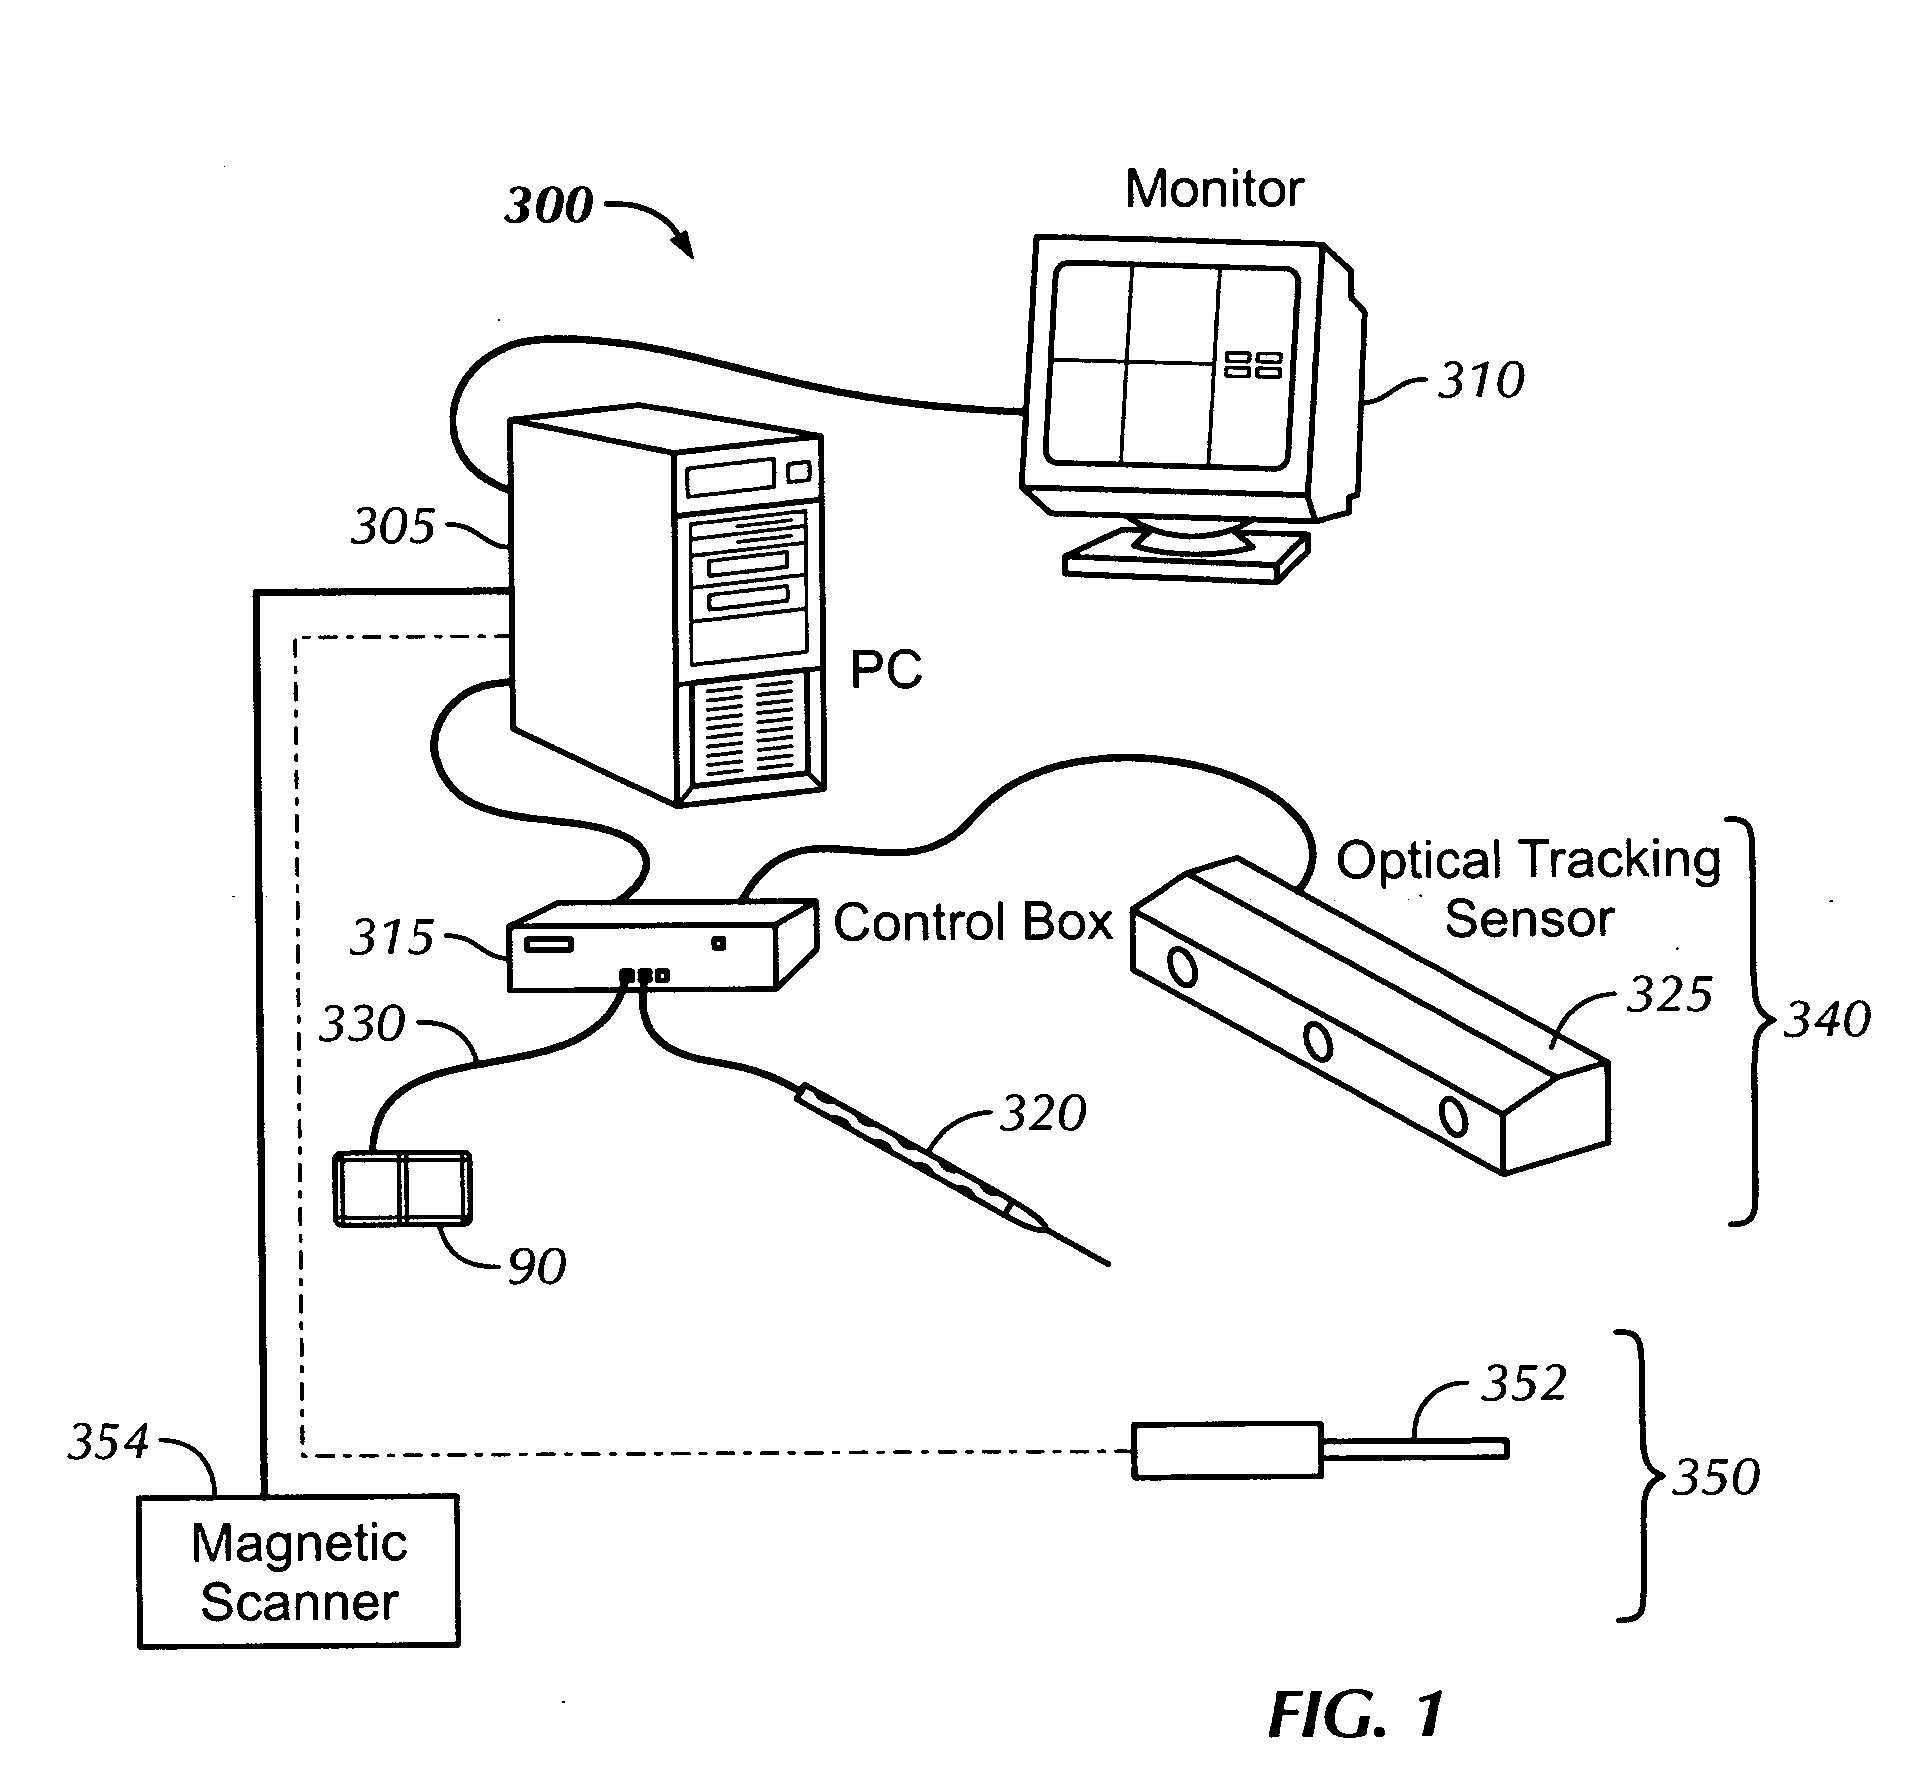 Method and apparatus for calibration, tracking and volume construction data for use in image-guided procedures